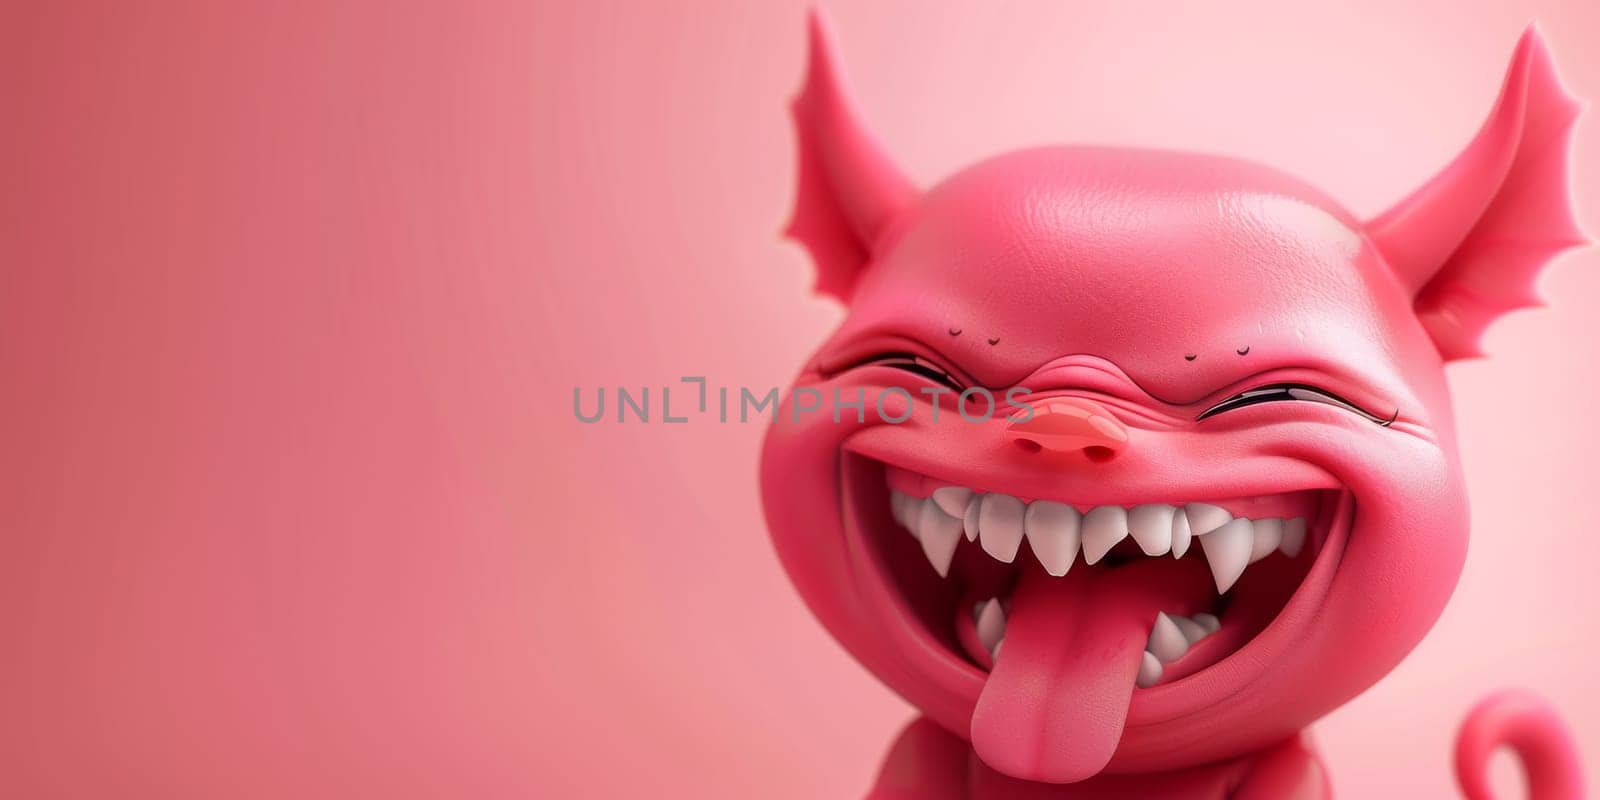 Little, baby devil smiling and sticking out his tongue, isolated on the bright pink background with copy space by Kadula